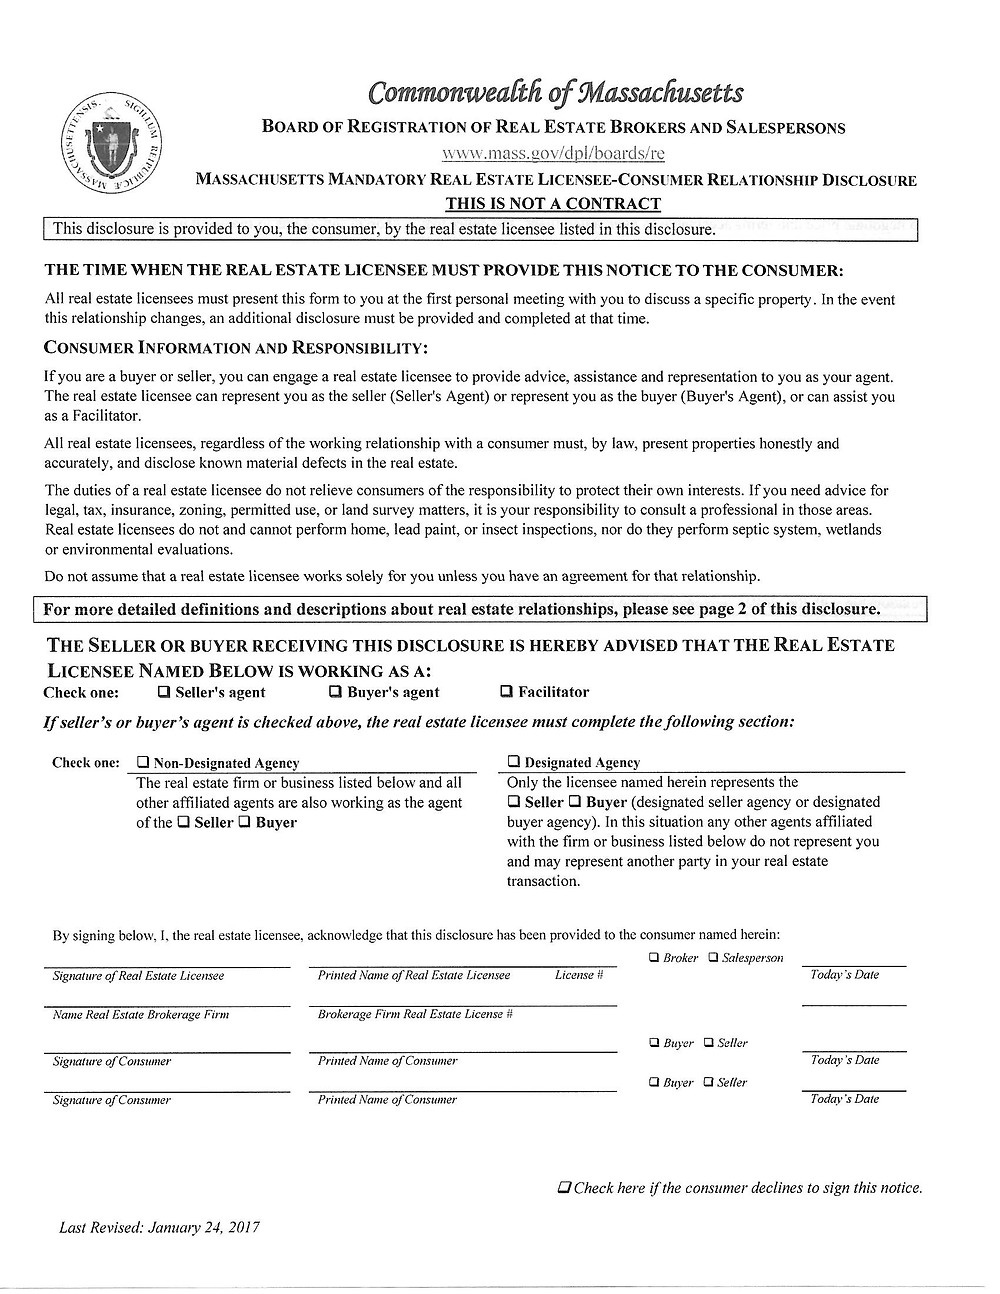 Example of Massachusetts real estate disclosure form.